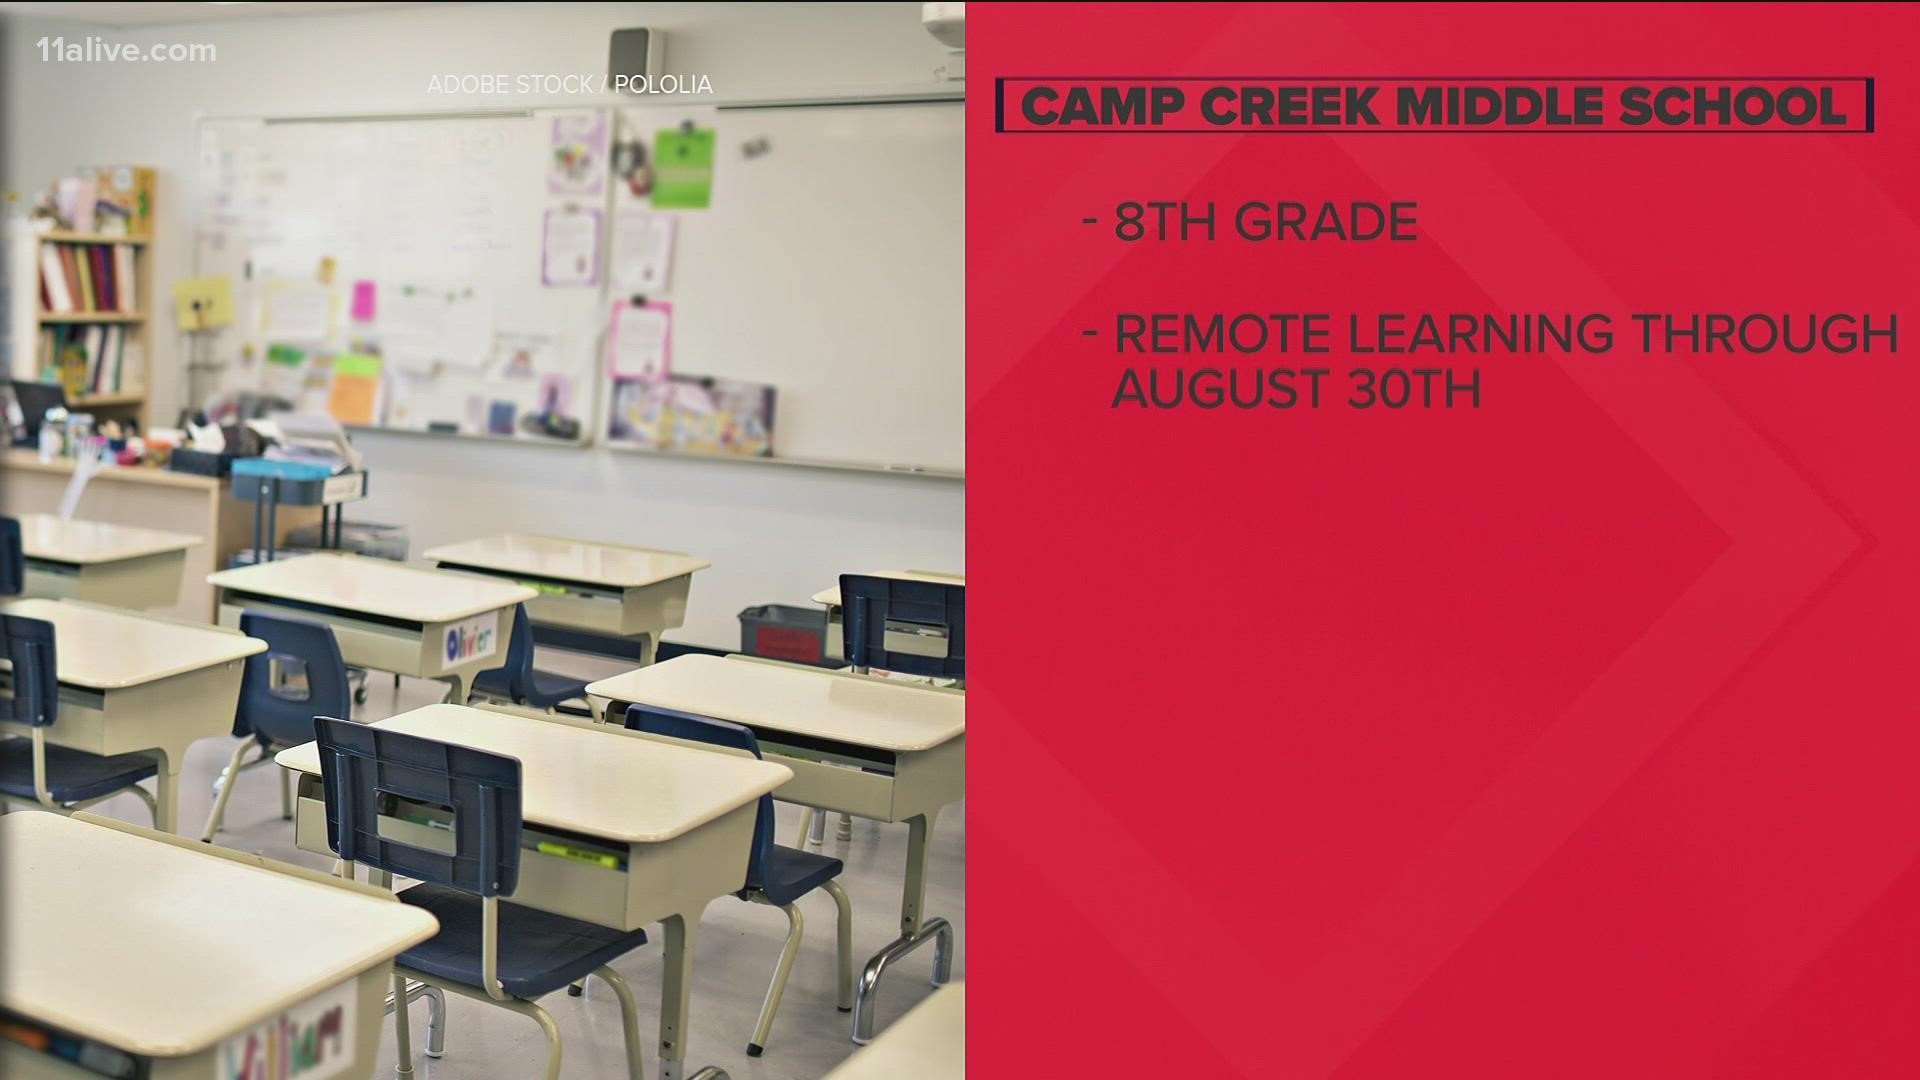 Fifth graders at Lake Windward will go remote starting Tuesday, Aug. 24. The same is for 8th grade students at Camp Creek Middle School.